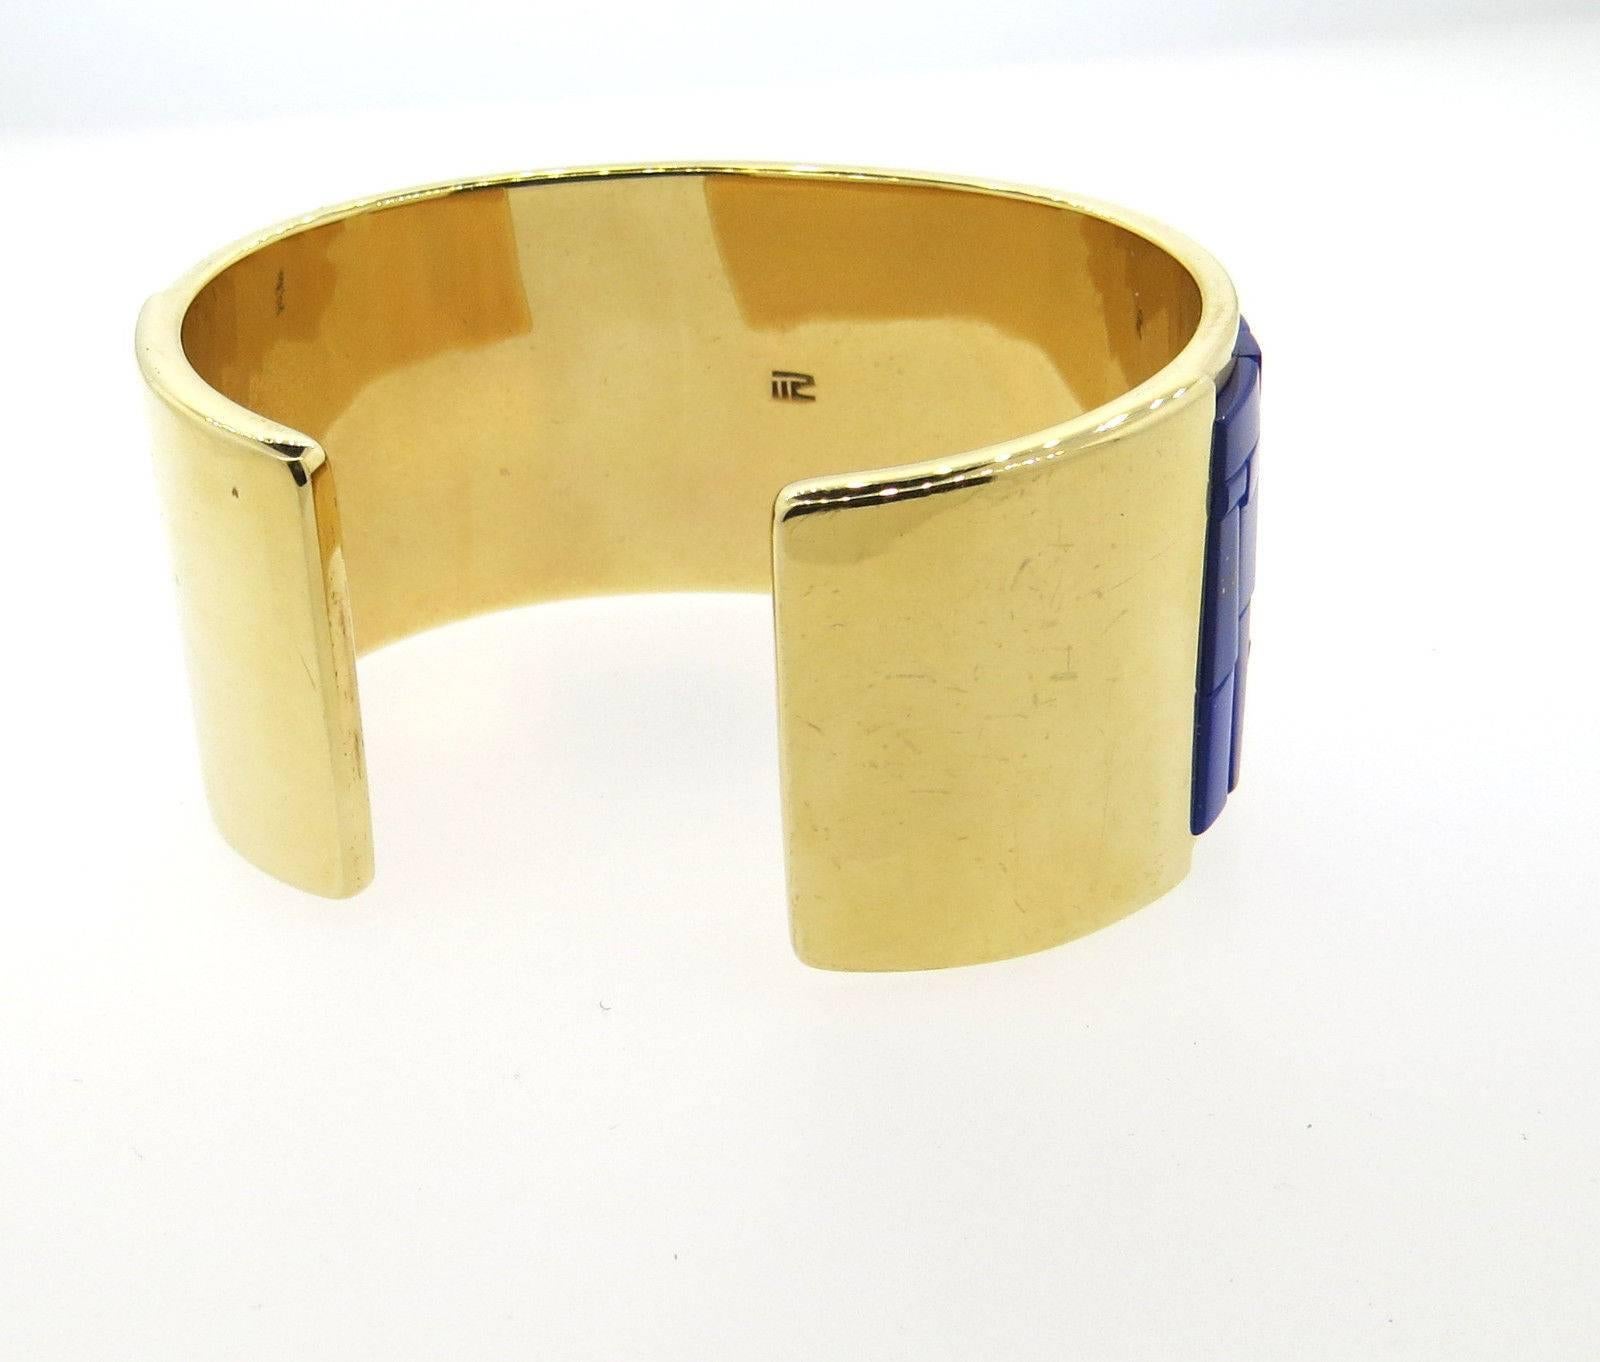 A 14k yellow gold bracelet set with lapis, coral and turquoise.  Crafted by Richard Chavez, the bracelet will fit up to a 6